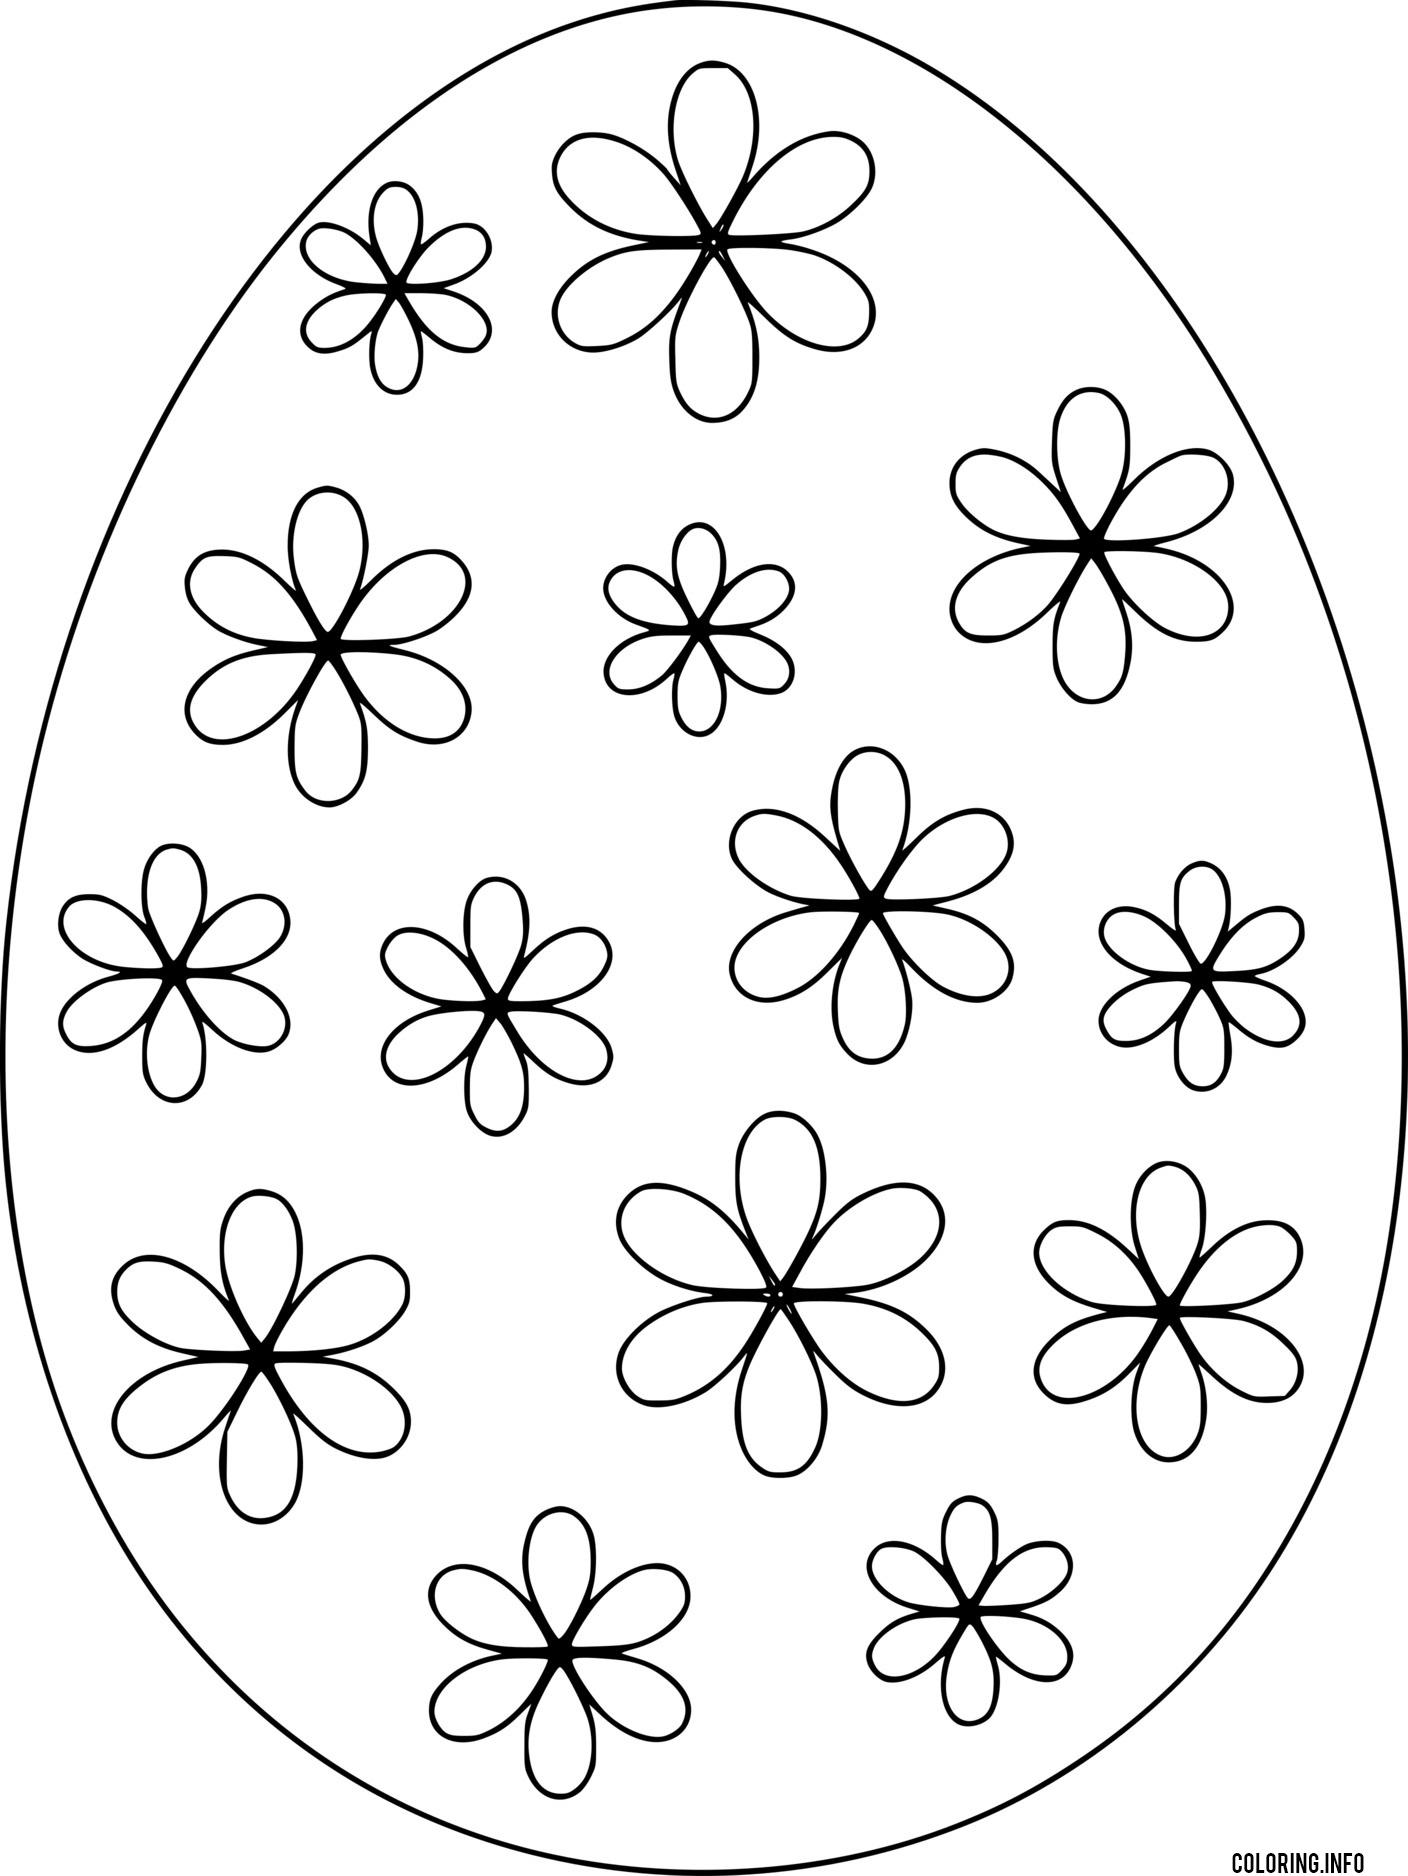 Easter Egg With Fourteen Flowers coloring